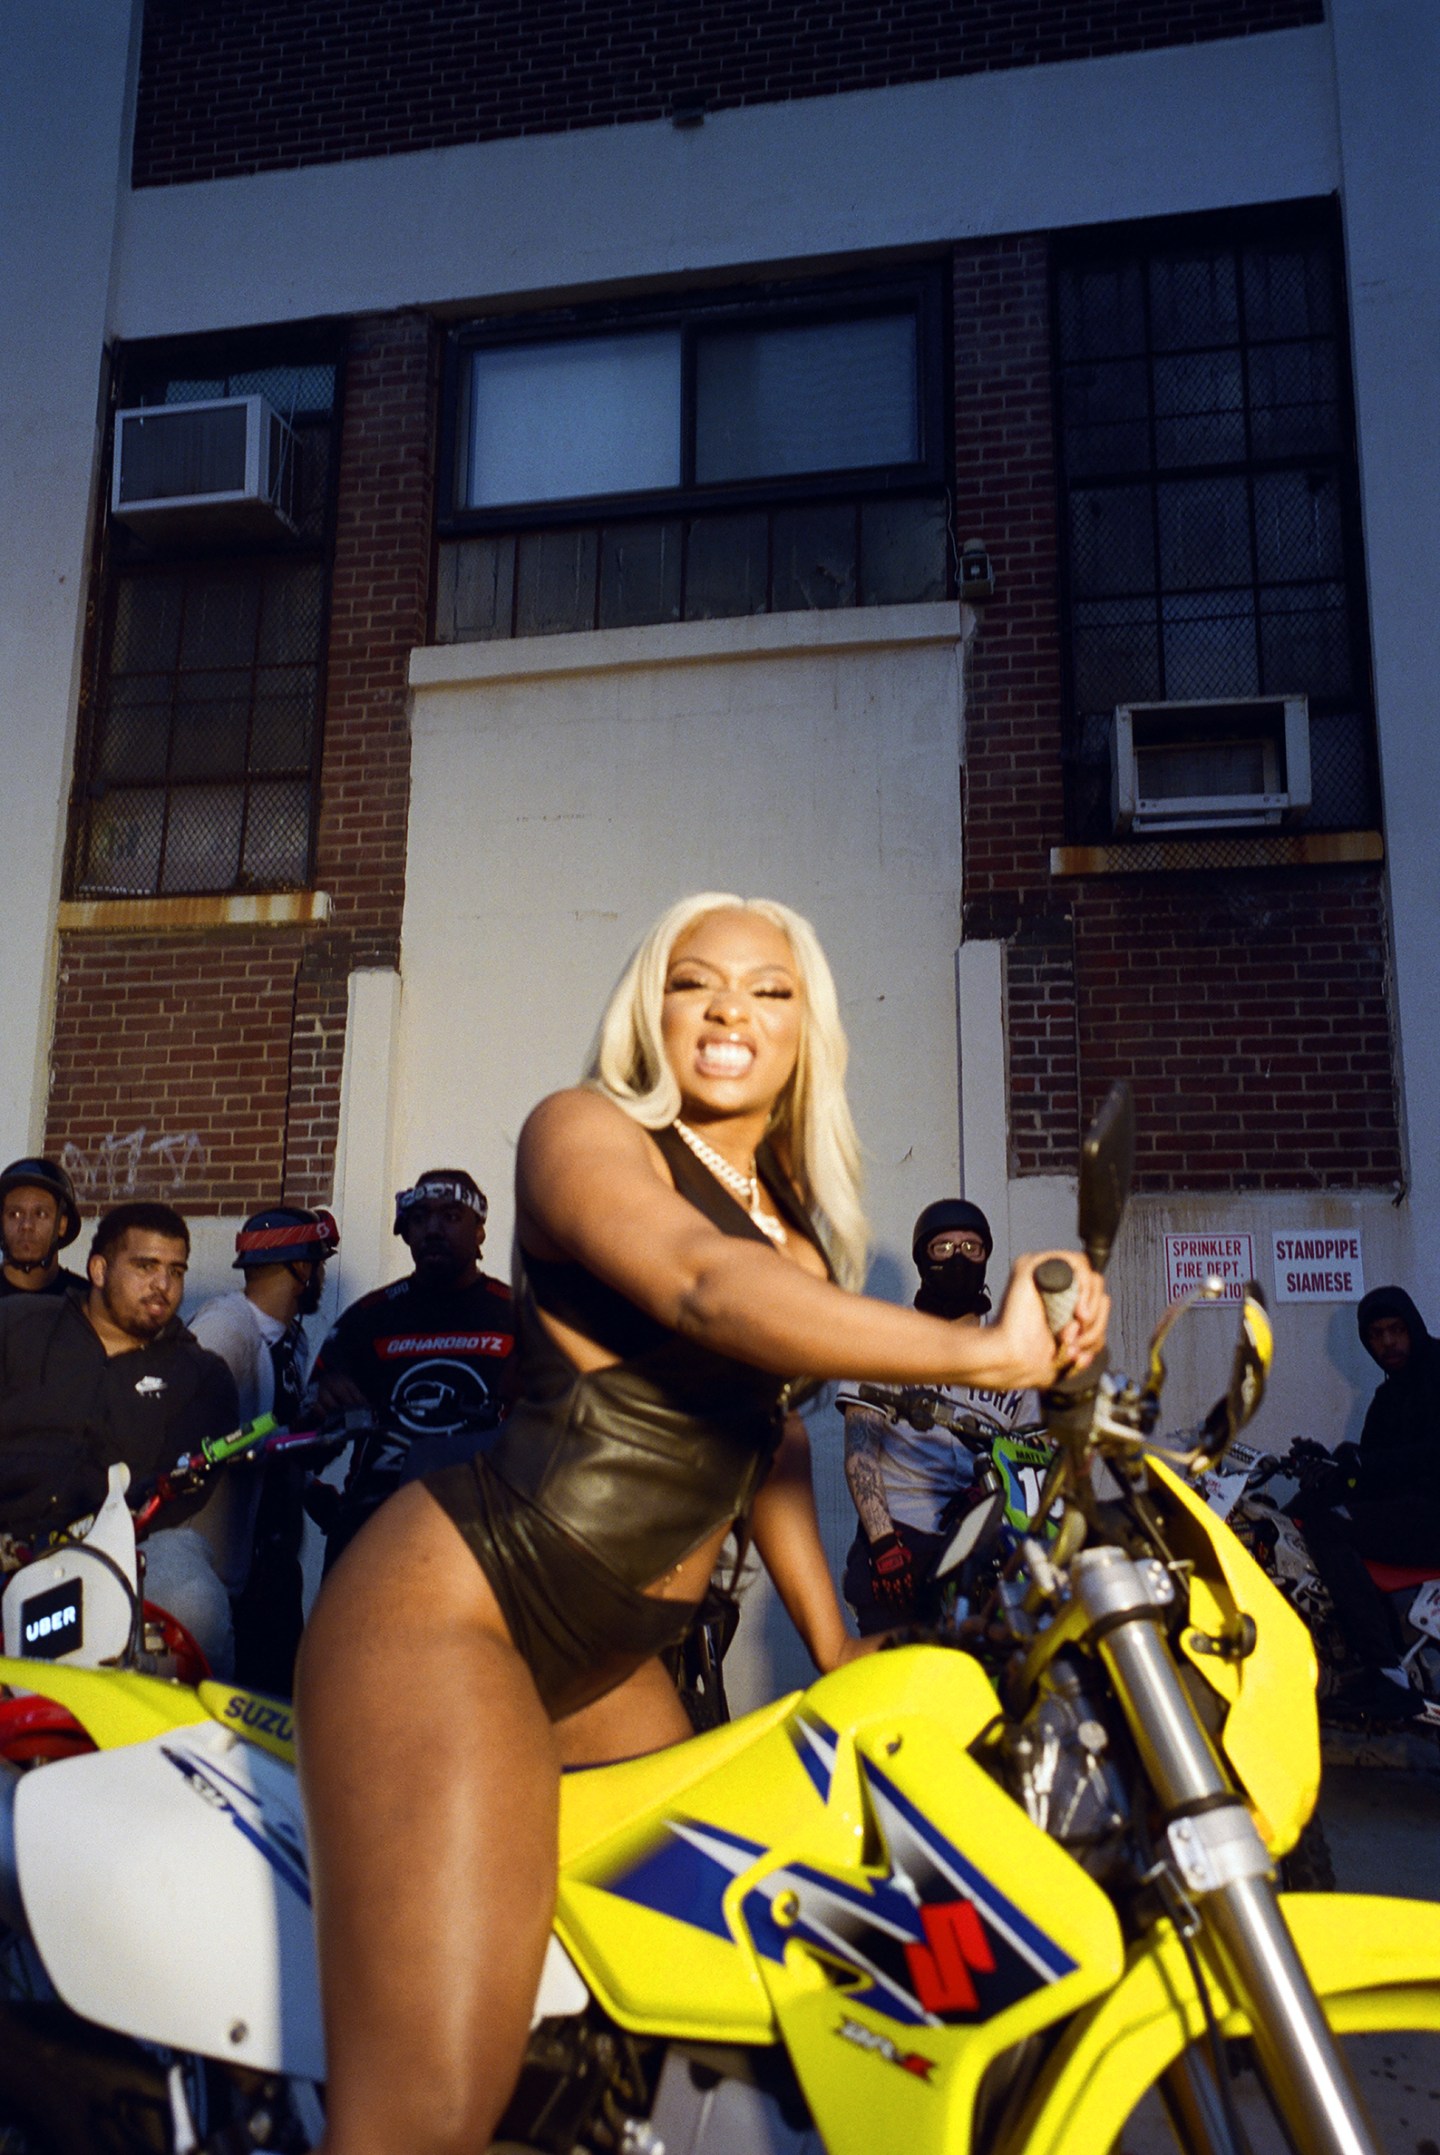 The Age of Thee Stallion